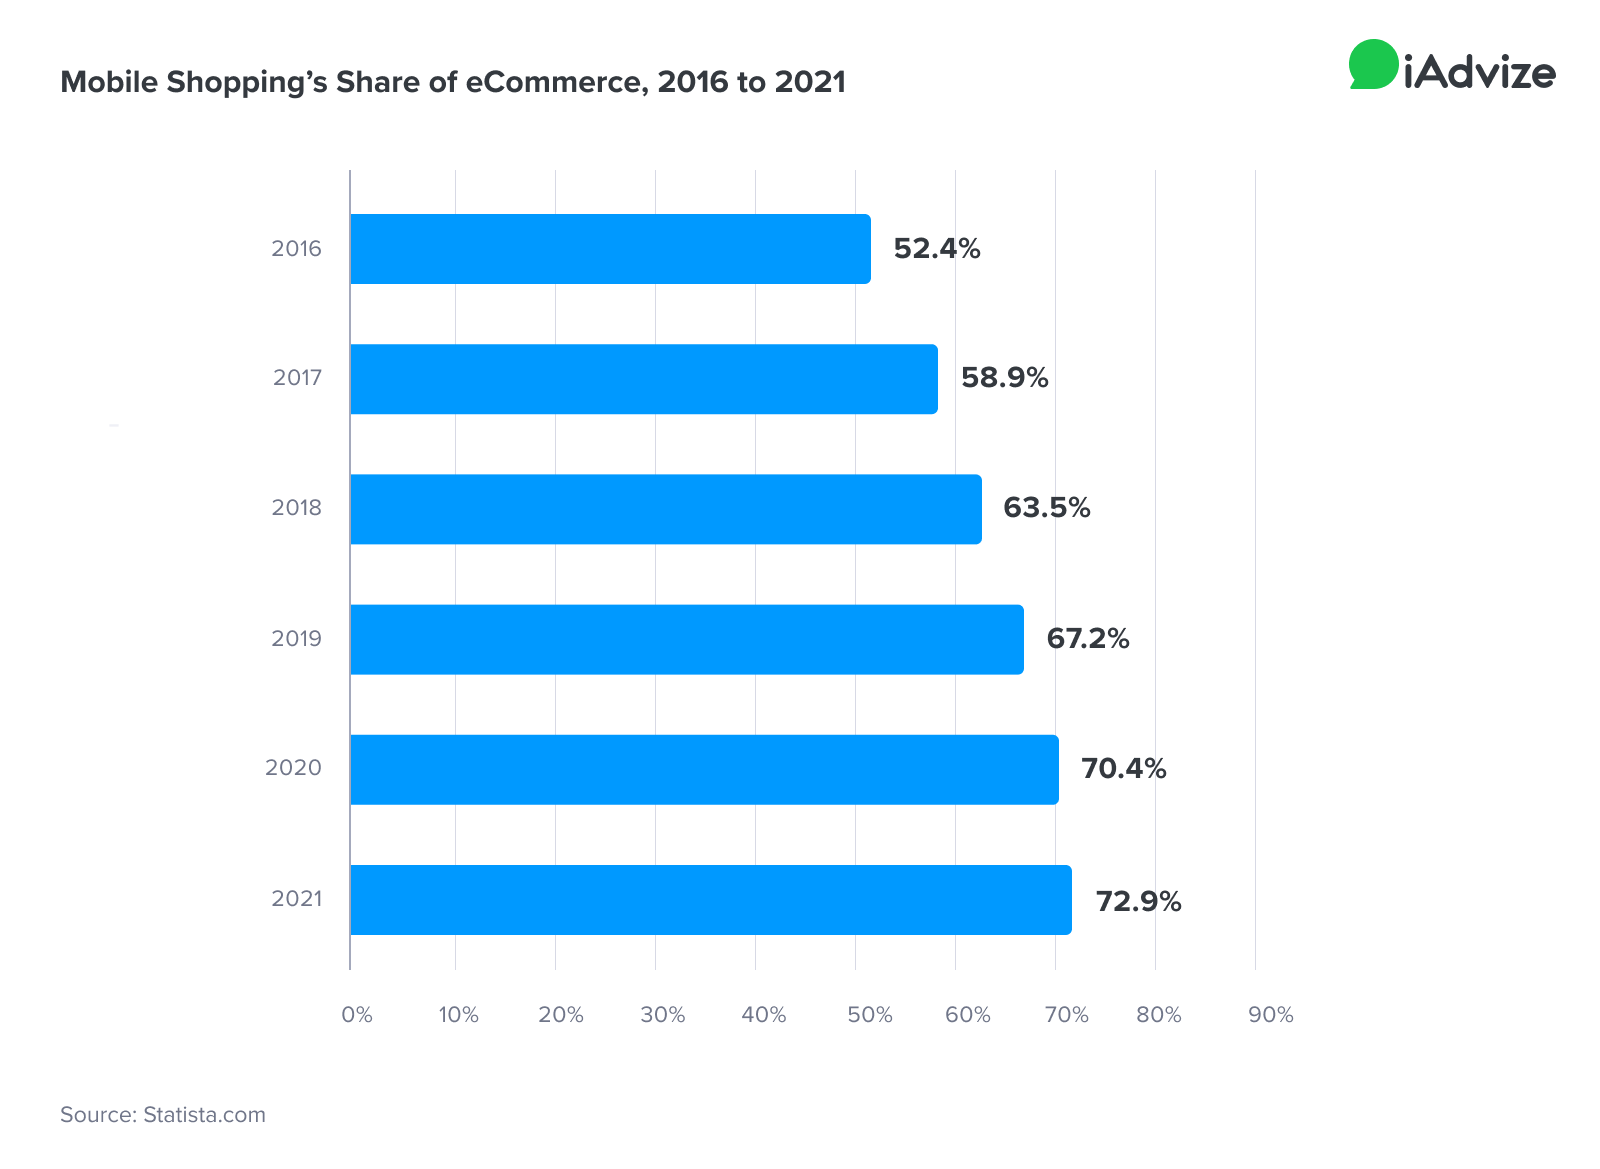 Mobile shopping's share of eCommerce, 2016 to 2021